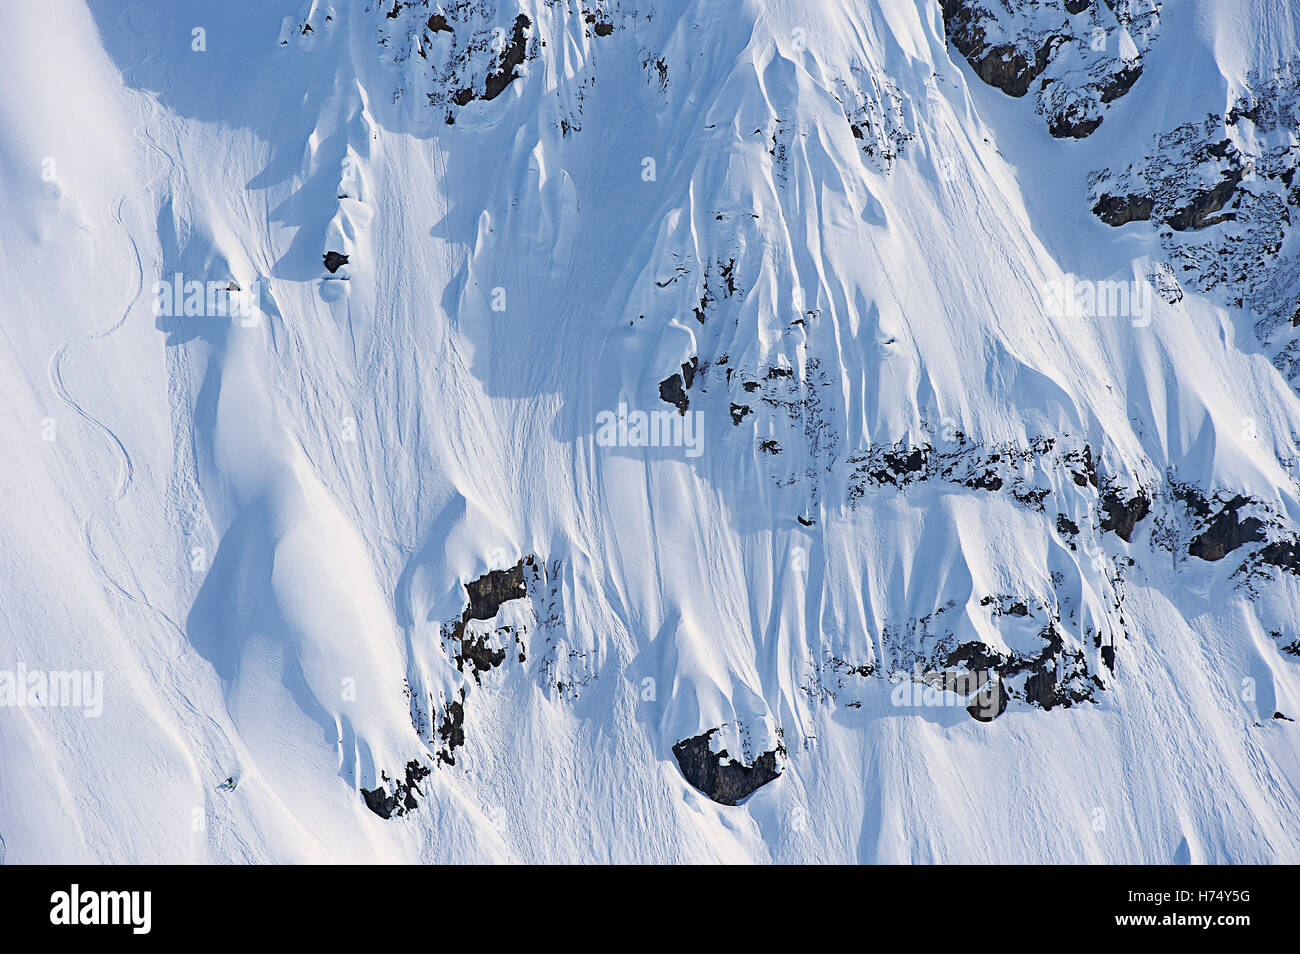 A skier skis a line in Haines, Alaska. Stock Photo